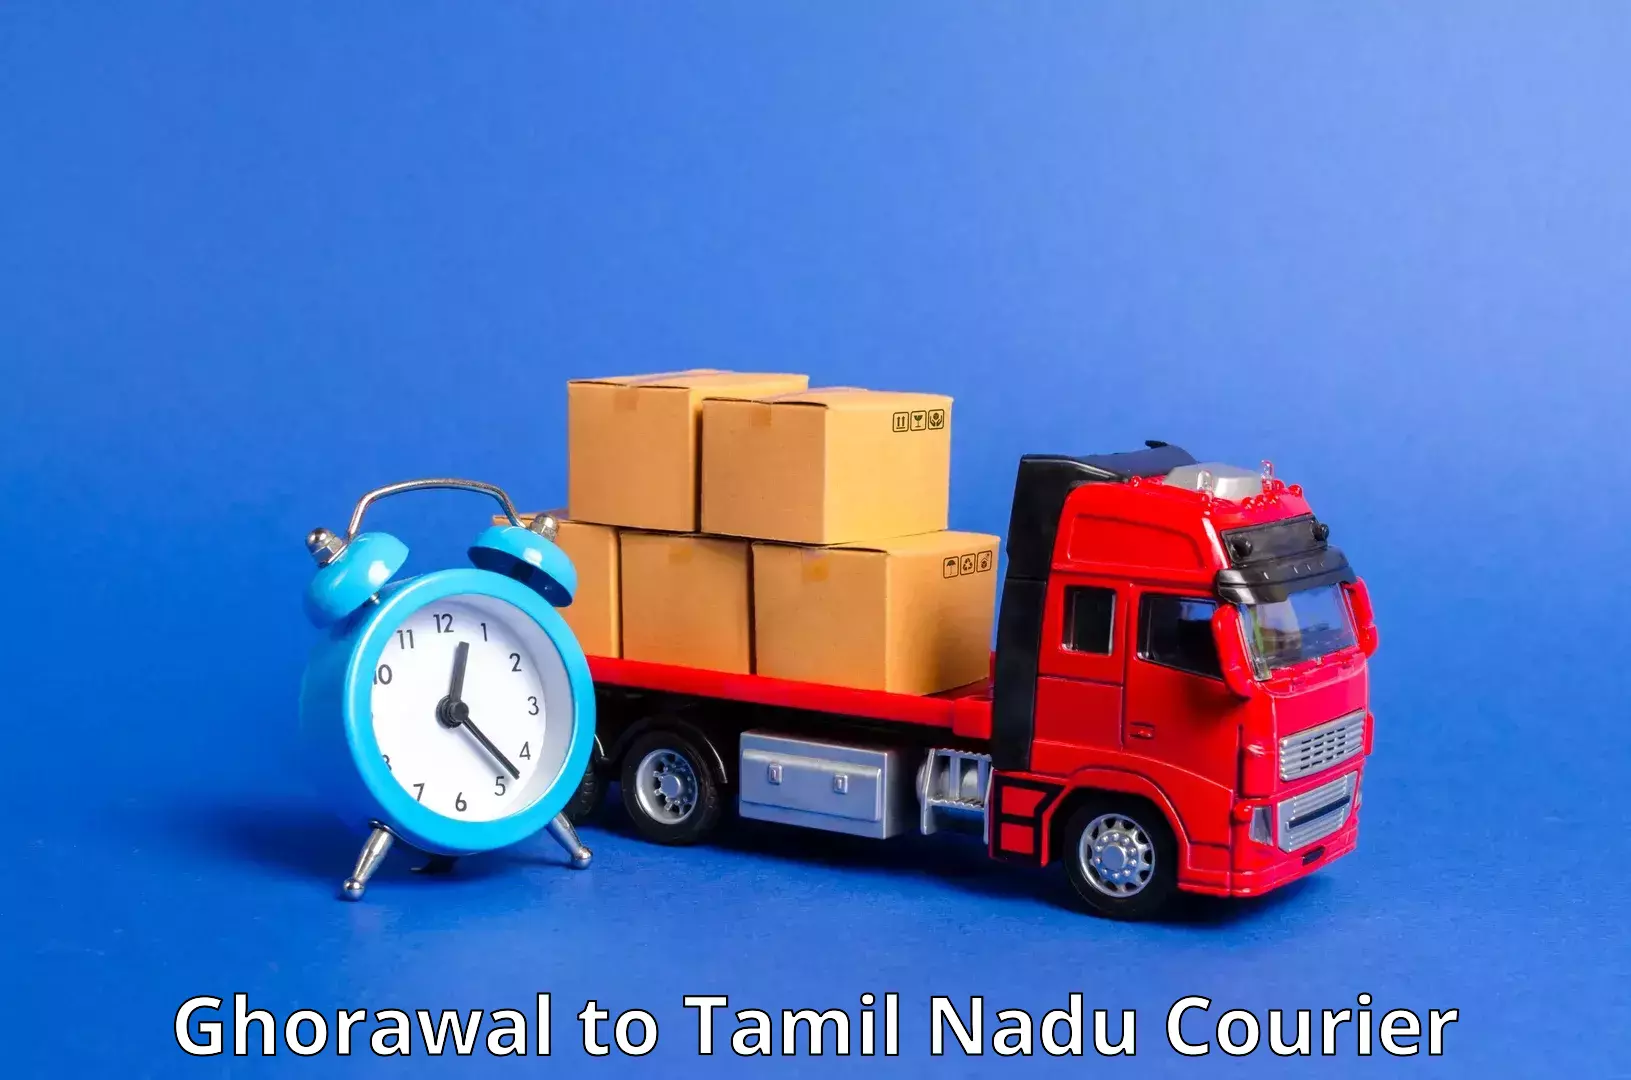 Courier service innovation in Ghorawal to Chennai